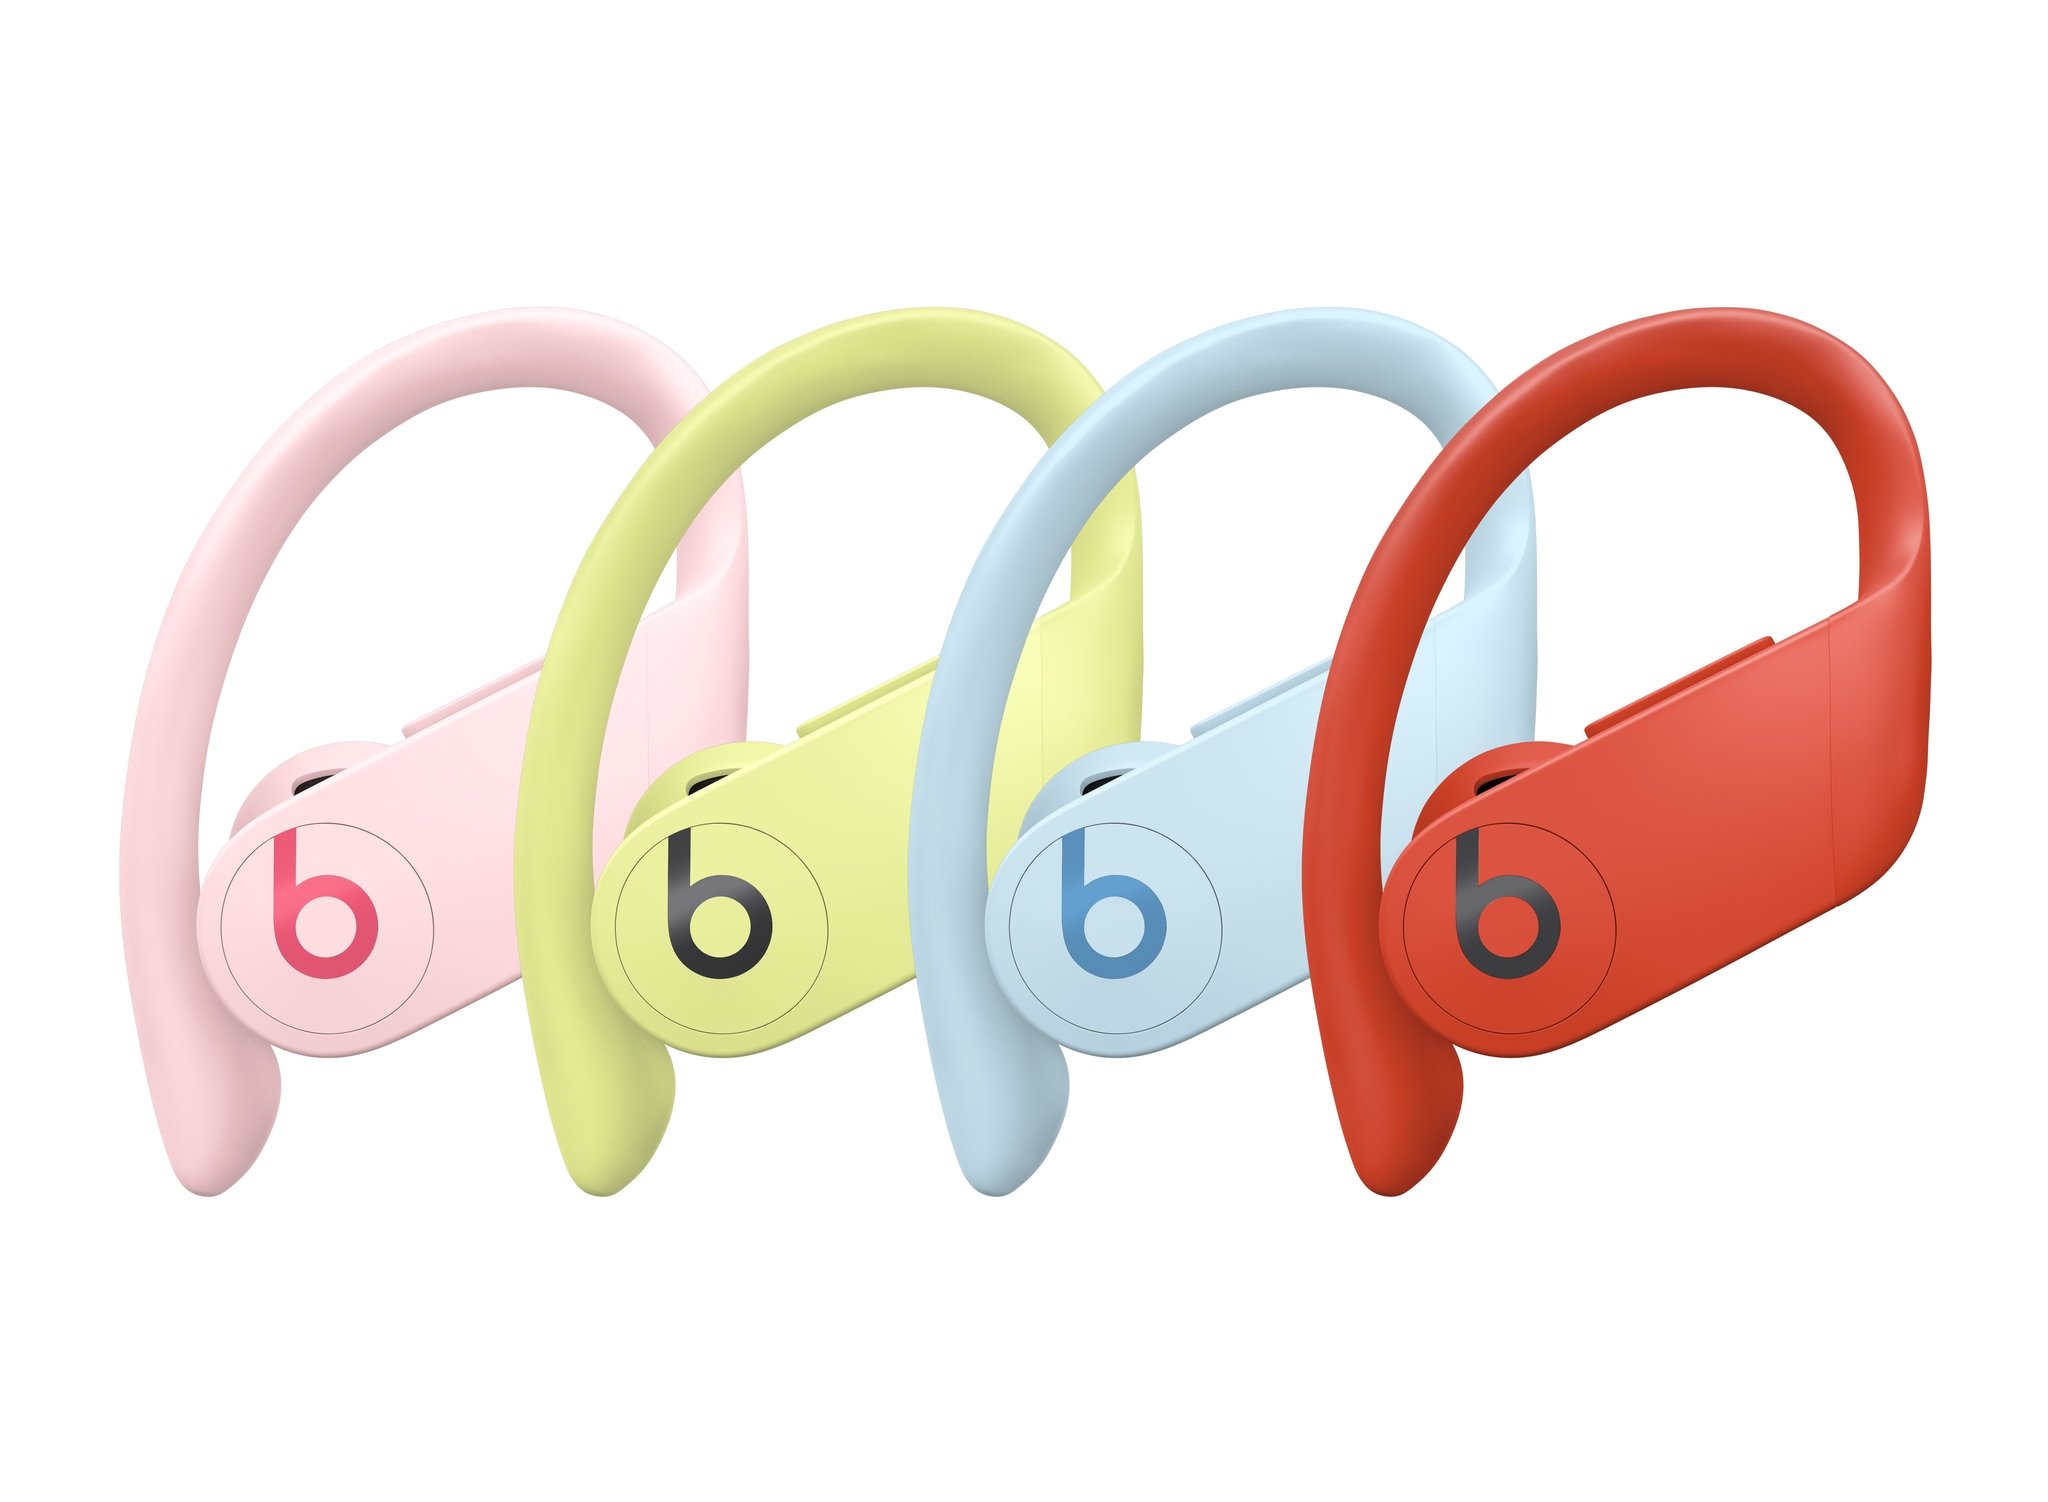 https://www.imore.com/sites/imore.com/files/styles/large/public/field/image/2020/05/powerbeats-pro-new-colors-product.jpg?itok=jPc0ZeP5